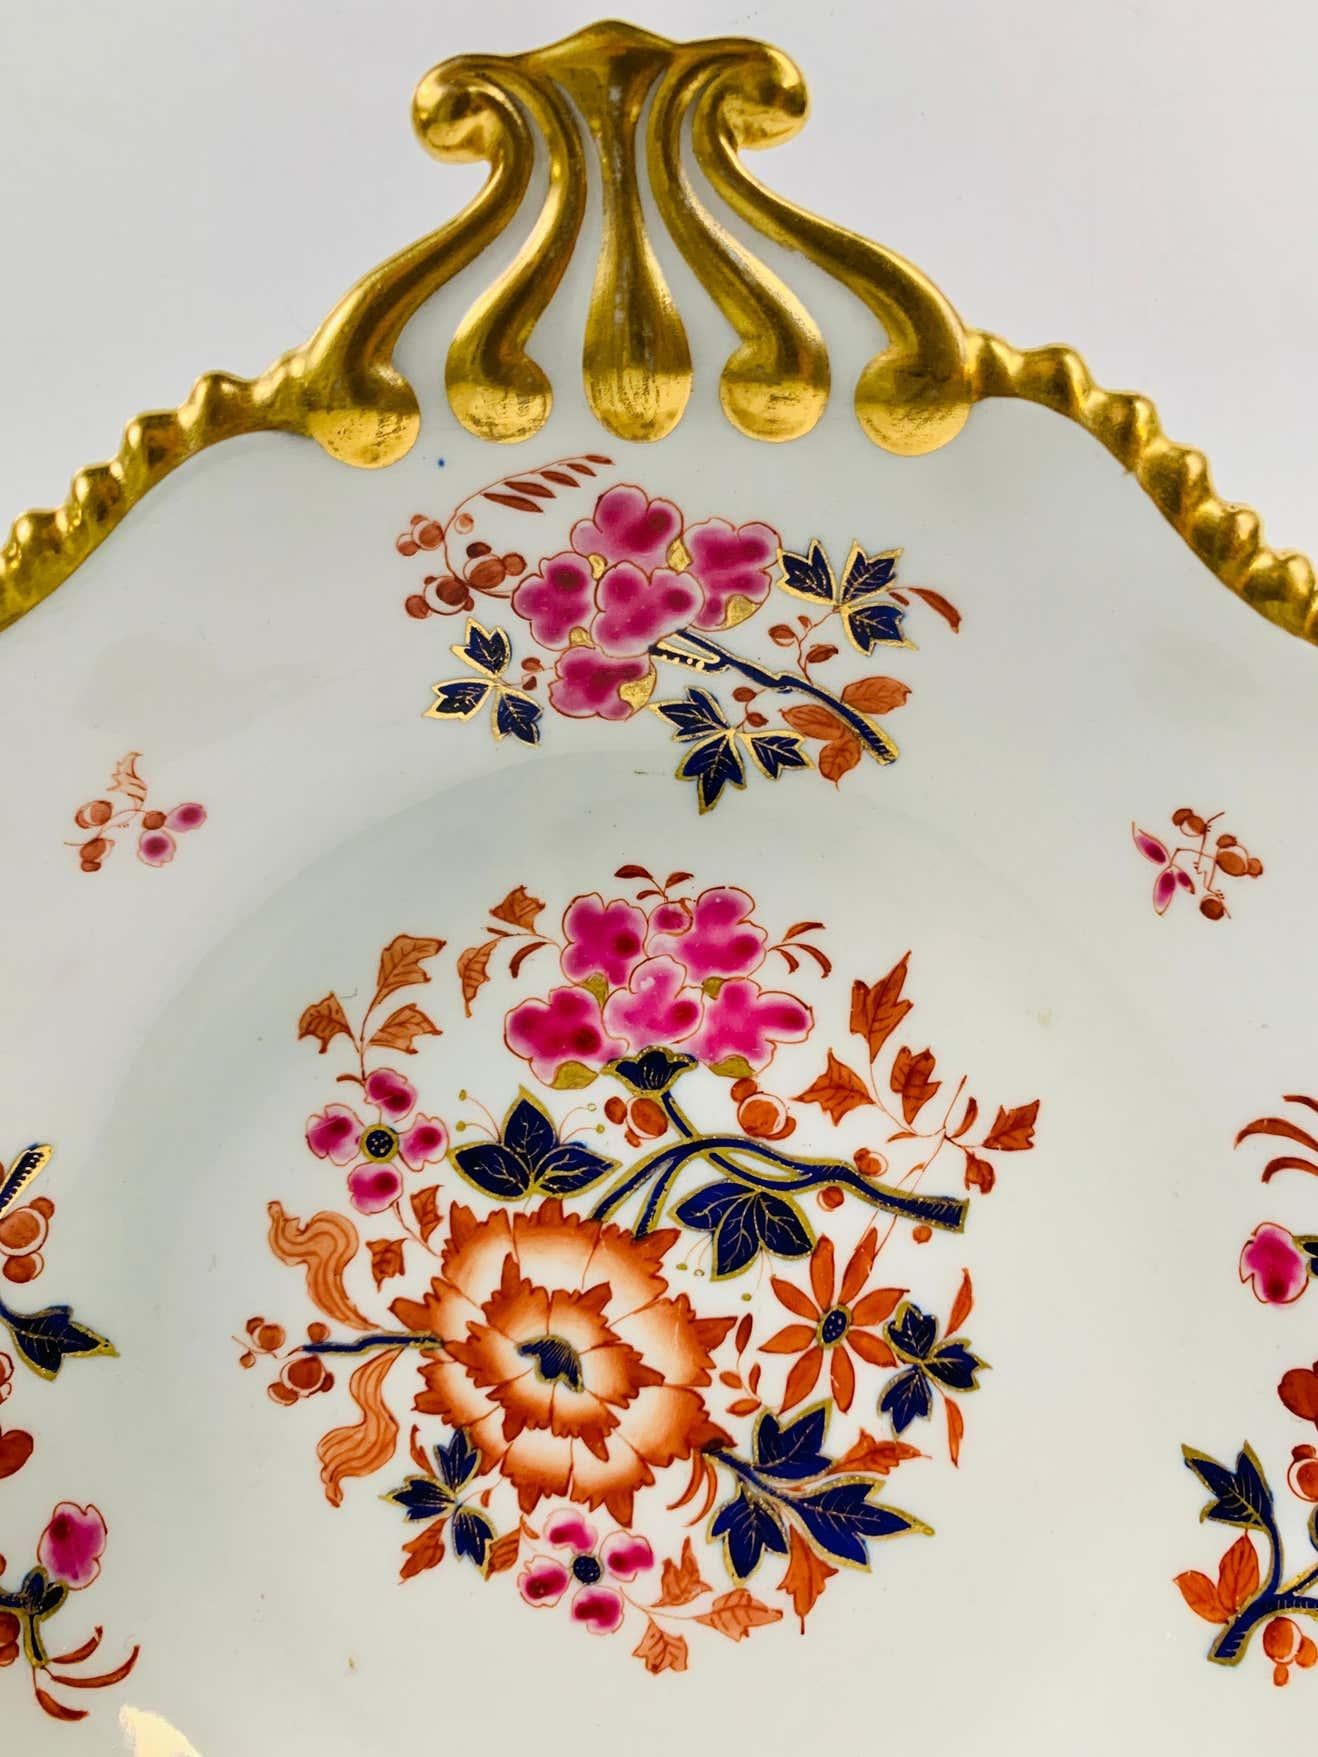 This George IV shell-shaped dish was made in the Flight Barr and Barr Worcester factory circa 1820.
The colors are exquisite. A ring of hand-painted flowers fills the border.
This shell-shaped dish is in excellent condition. 
Dimensions: 8.5